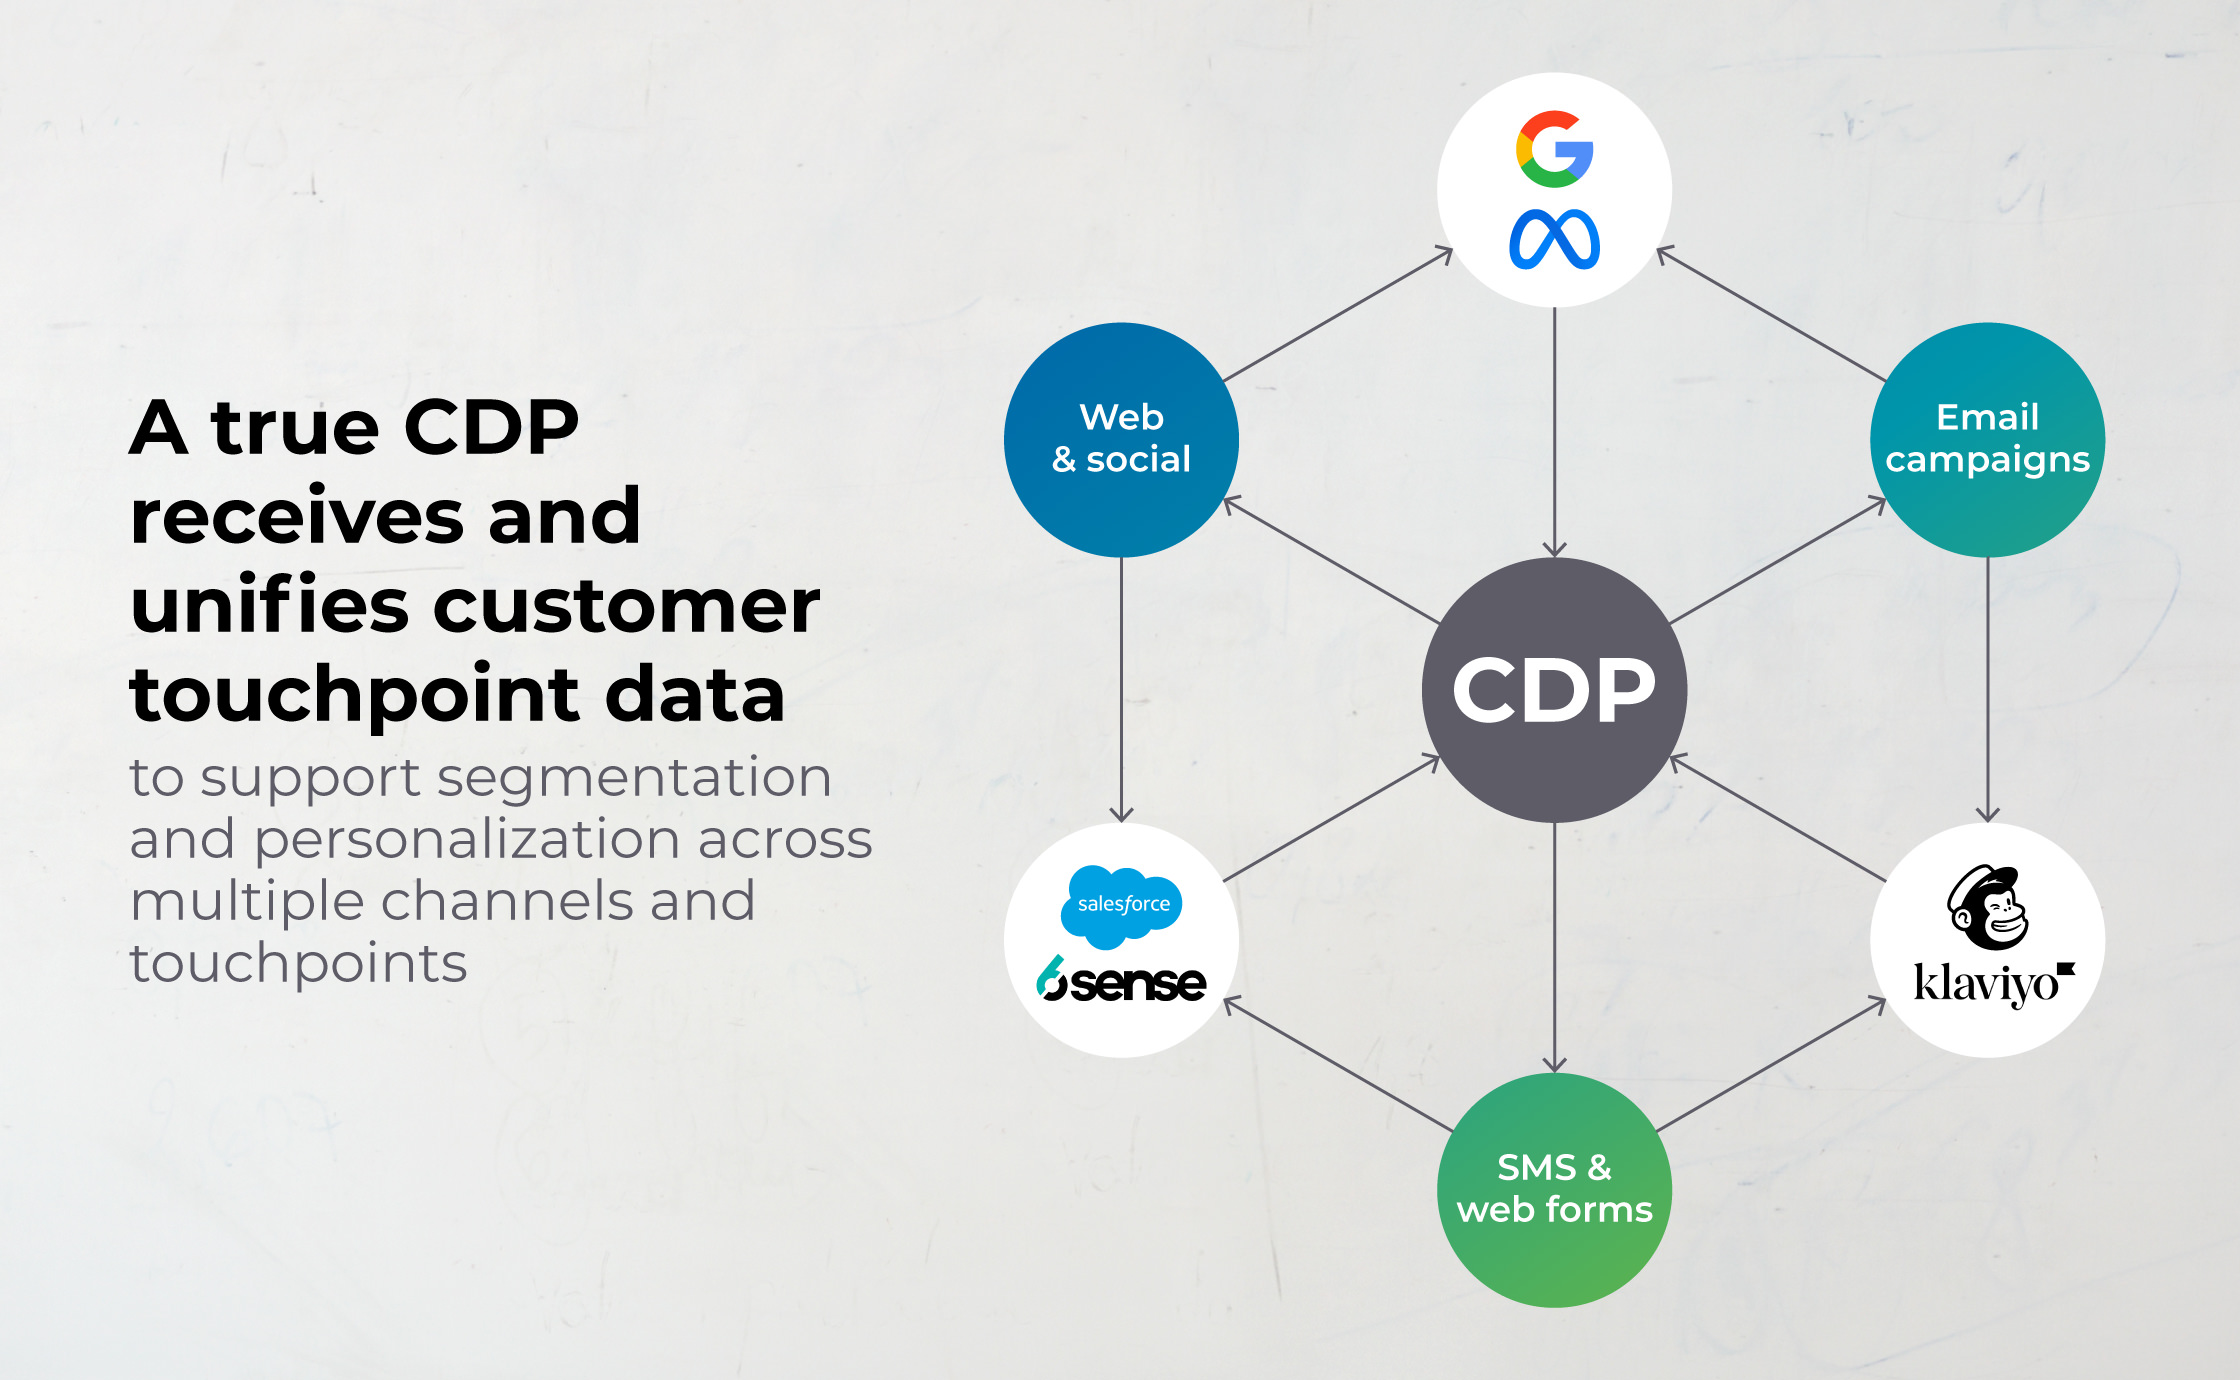 A true CDP receives and unifies customer touchpoint data to support segmentation and personalization across multiple channels and touchpoints.